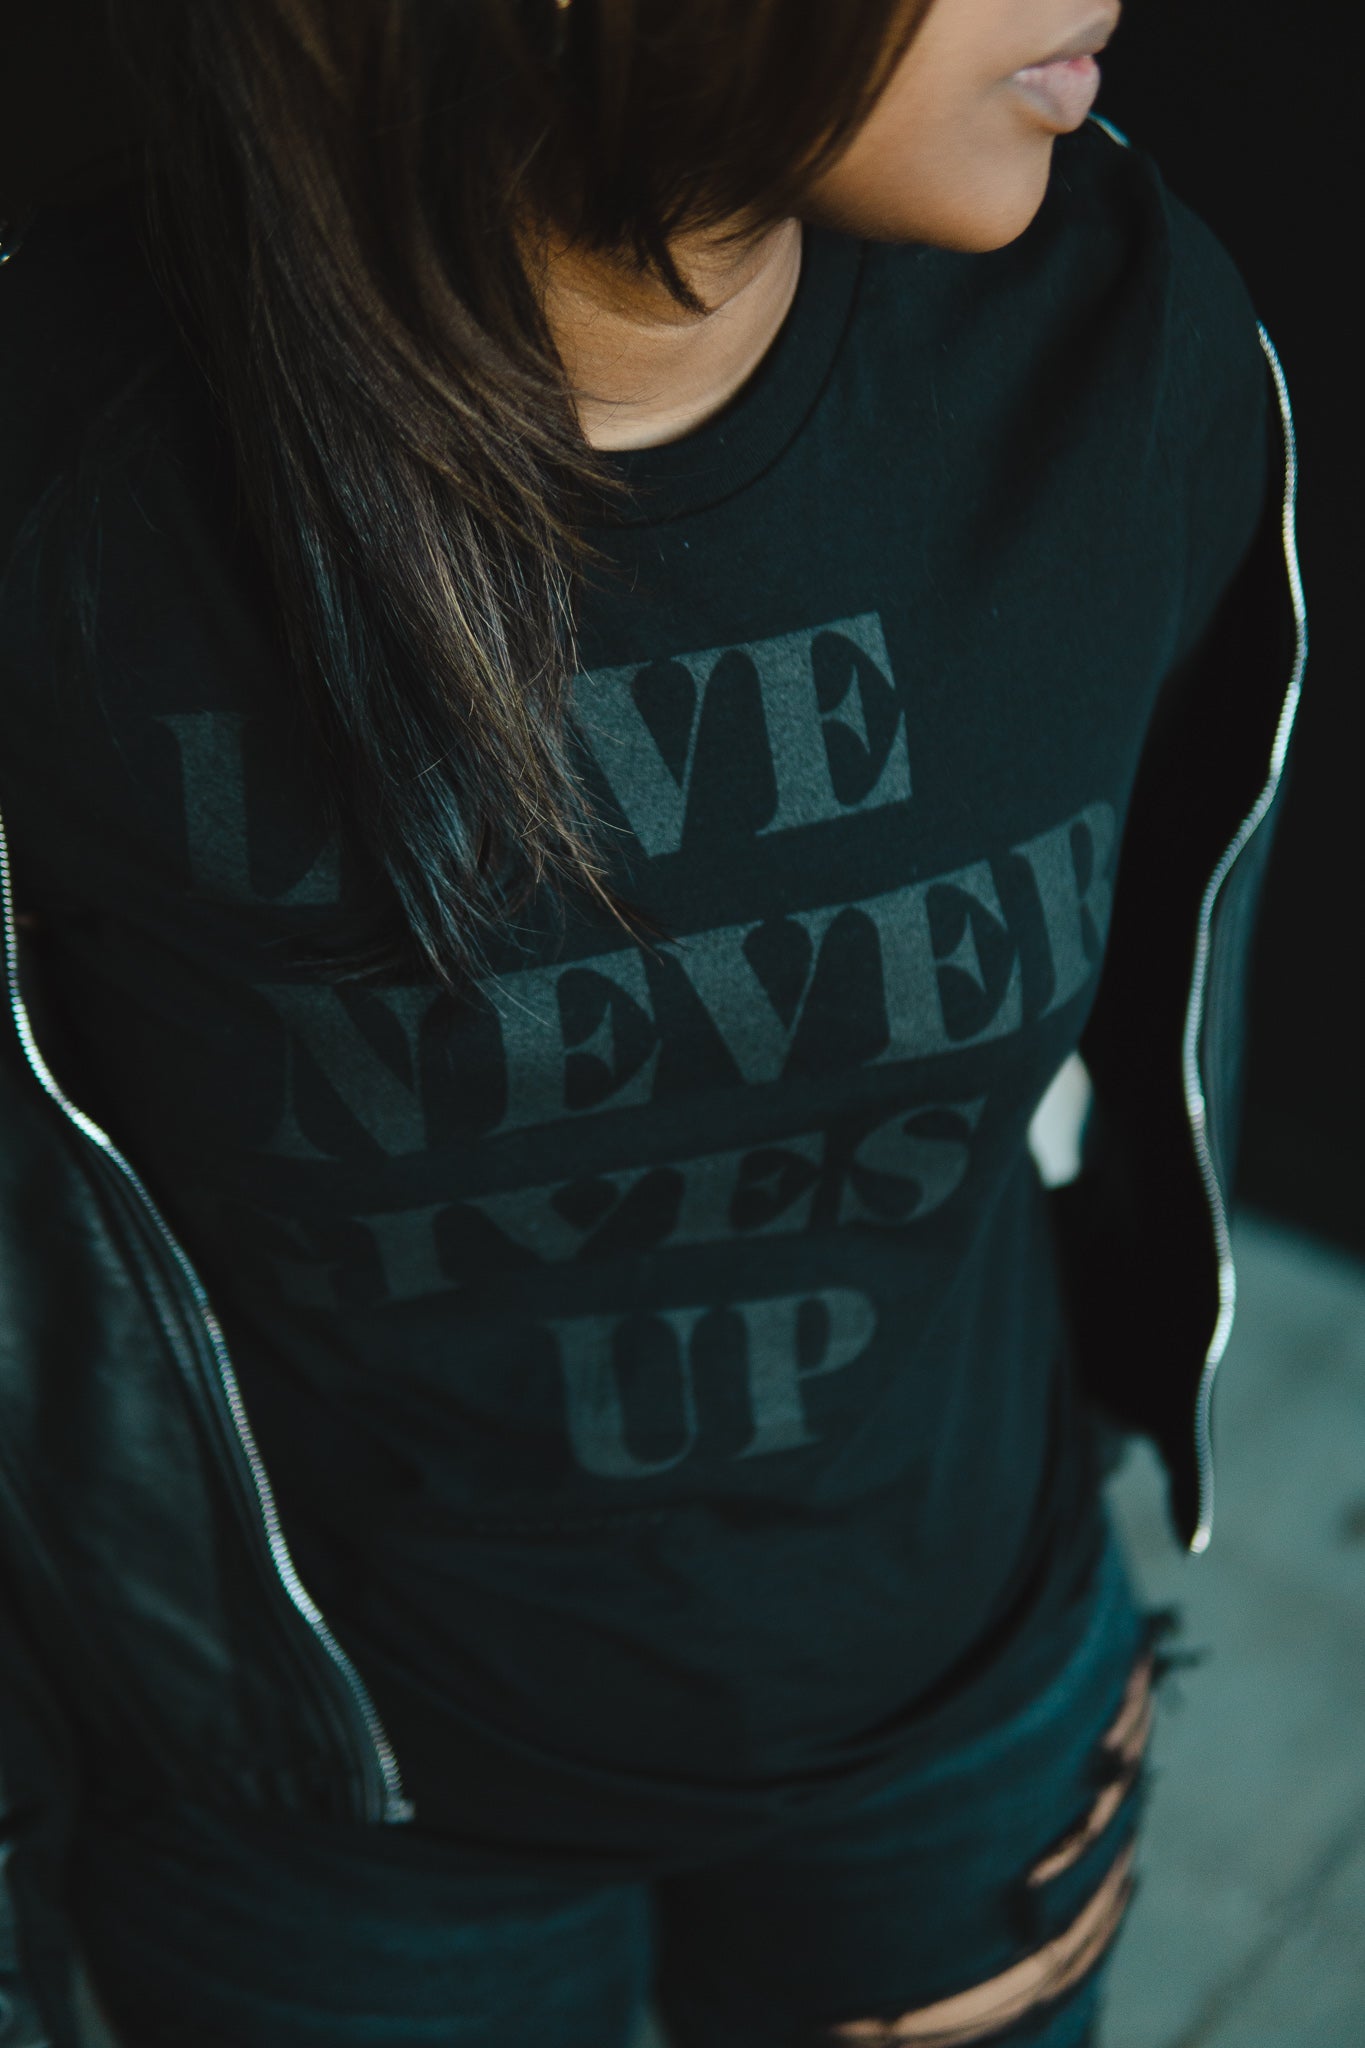 Love Never Gives Up (BLKonBLK) Adult Box T-Shirt